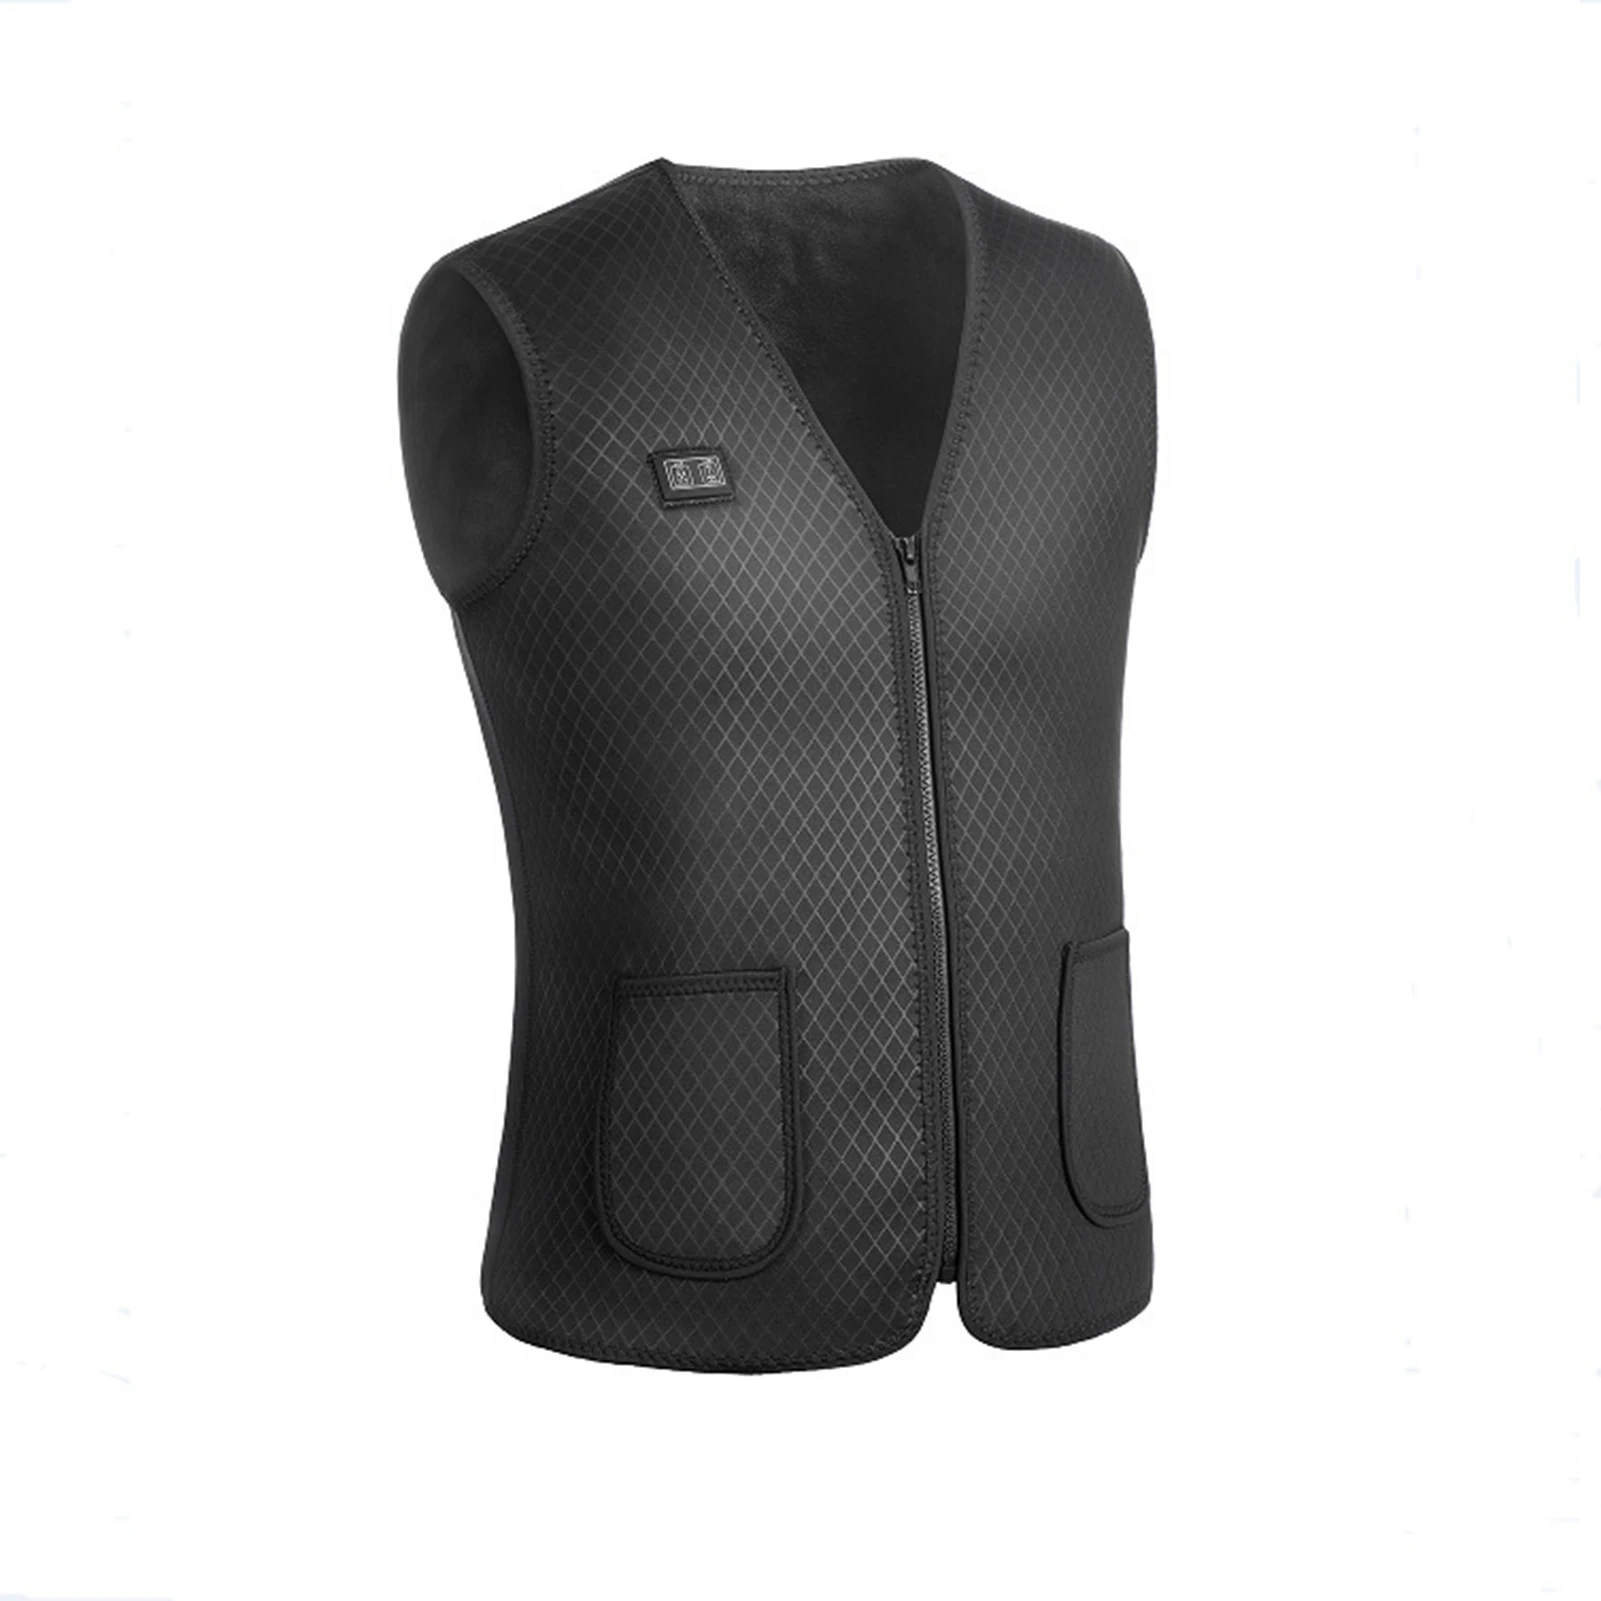 

Warming Heating Vest Body Temperature Control 3 Seconds Instant Heat for Mother Father Seniors Gift